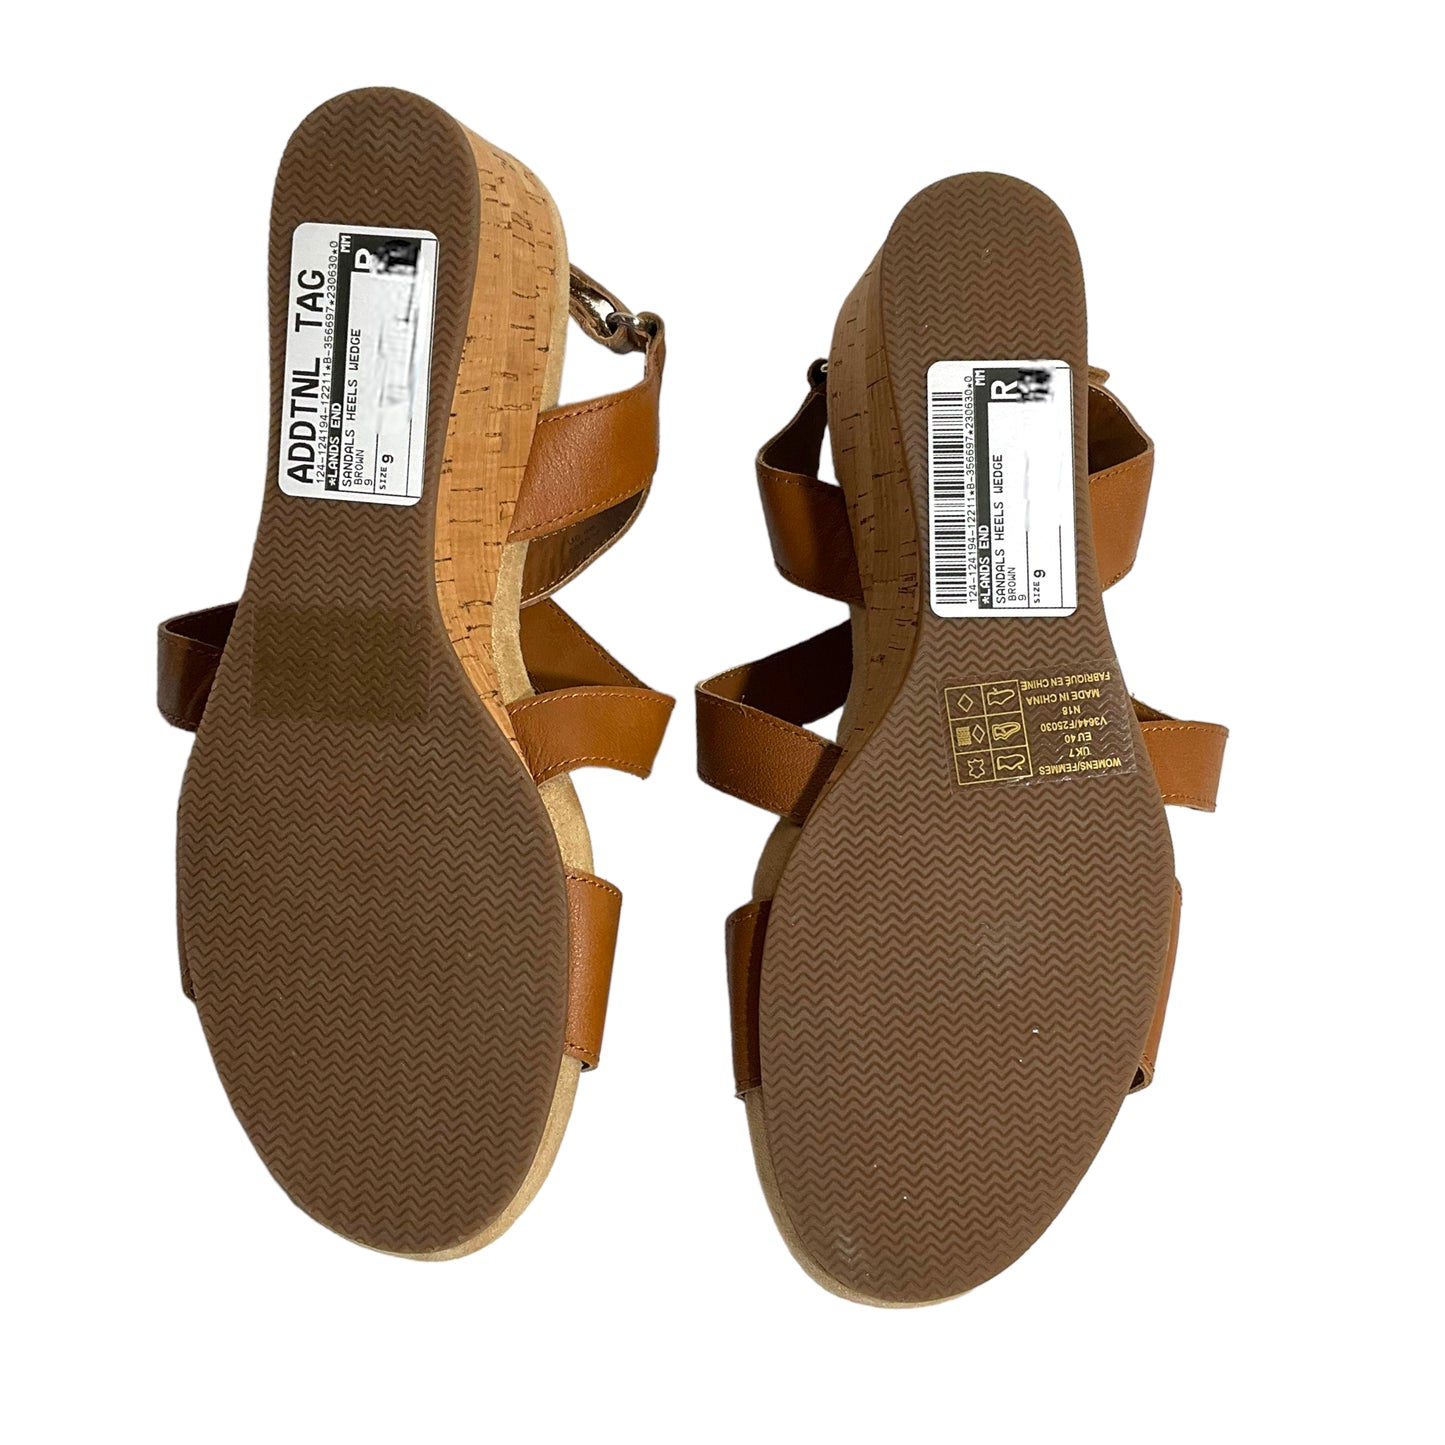 Sandals Heels Wedge By Lands End  Size: 9